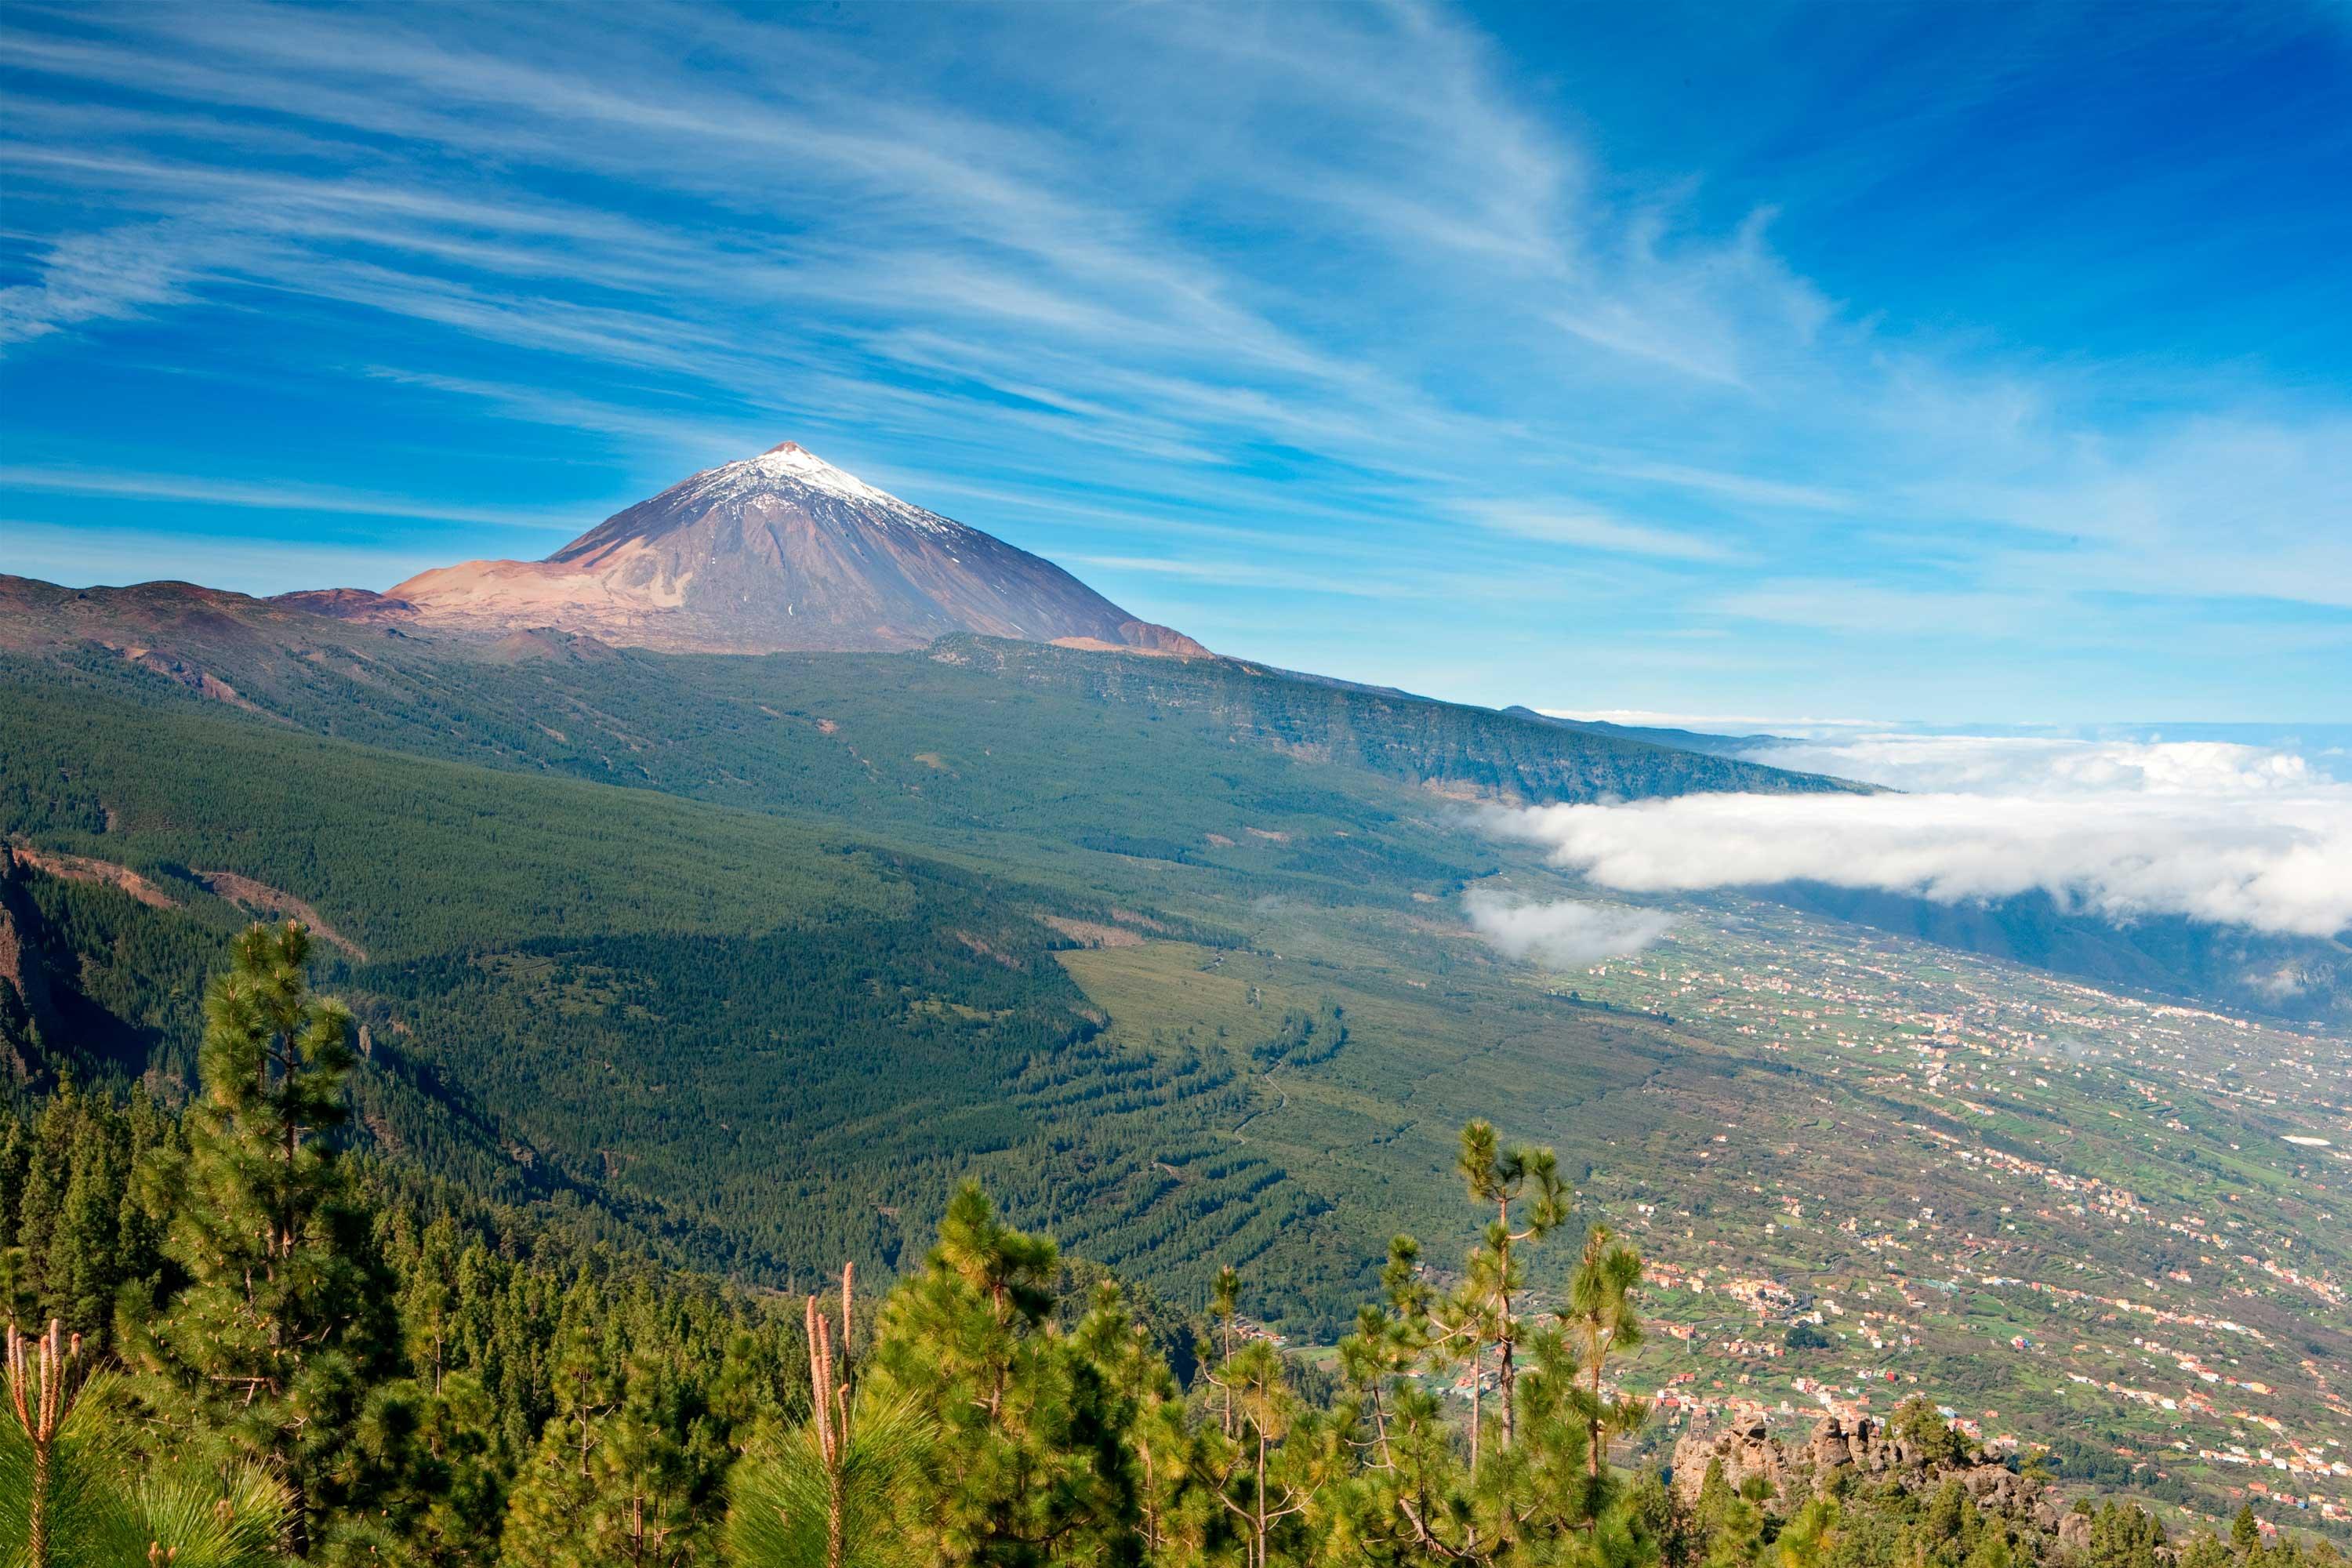 From Teide to the Orotava